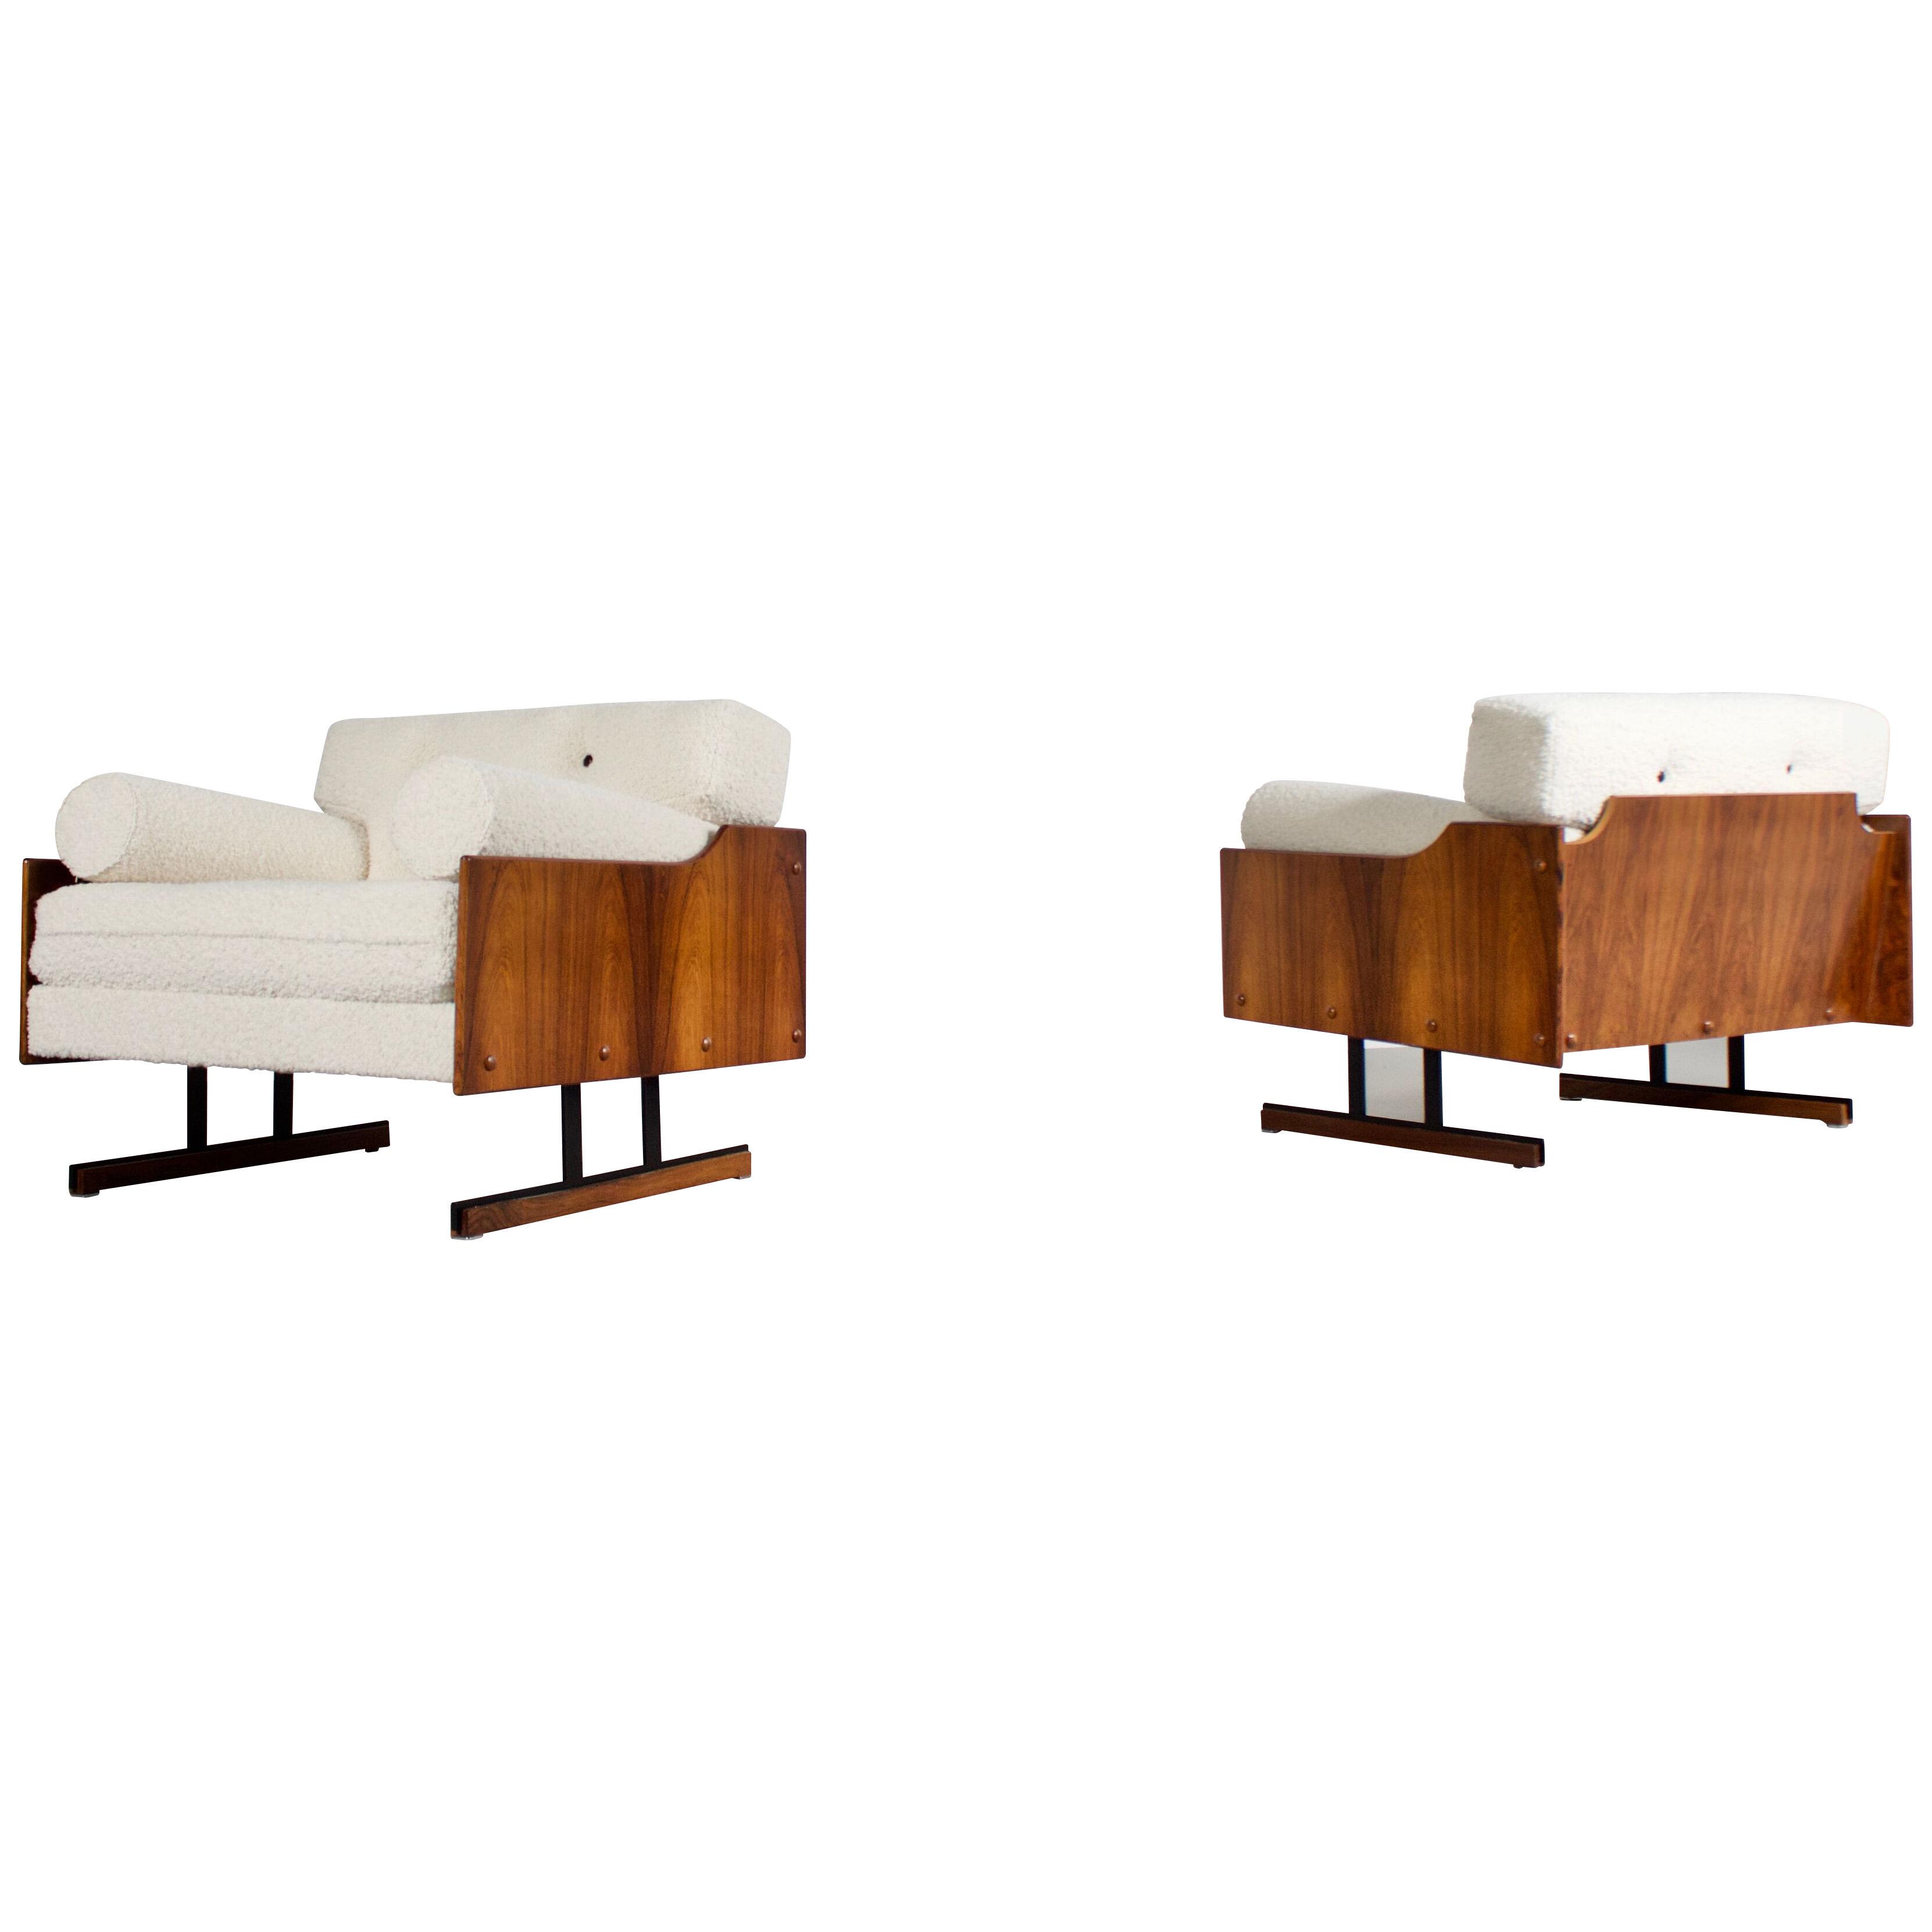 Exceptional Rosewood and Bouclé Lounge Chairs by Moveis Corazza, Brazil, 1960s